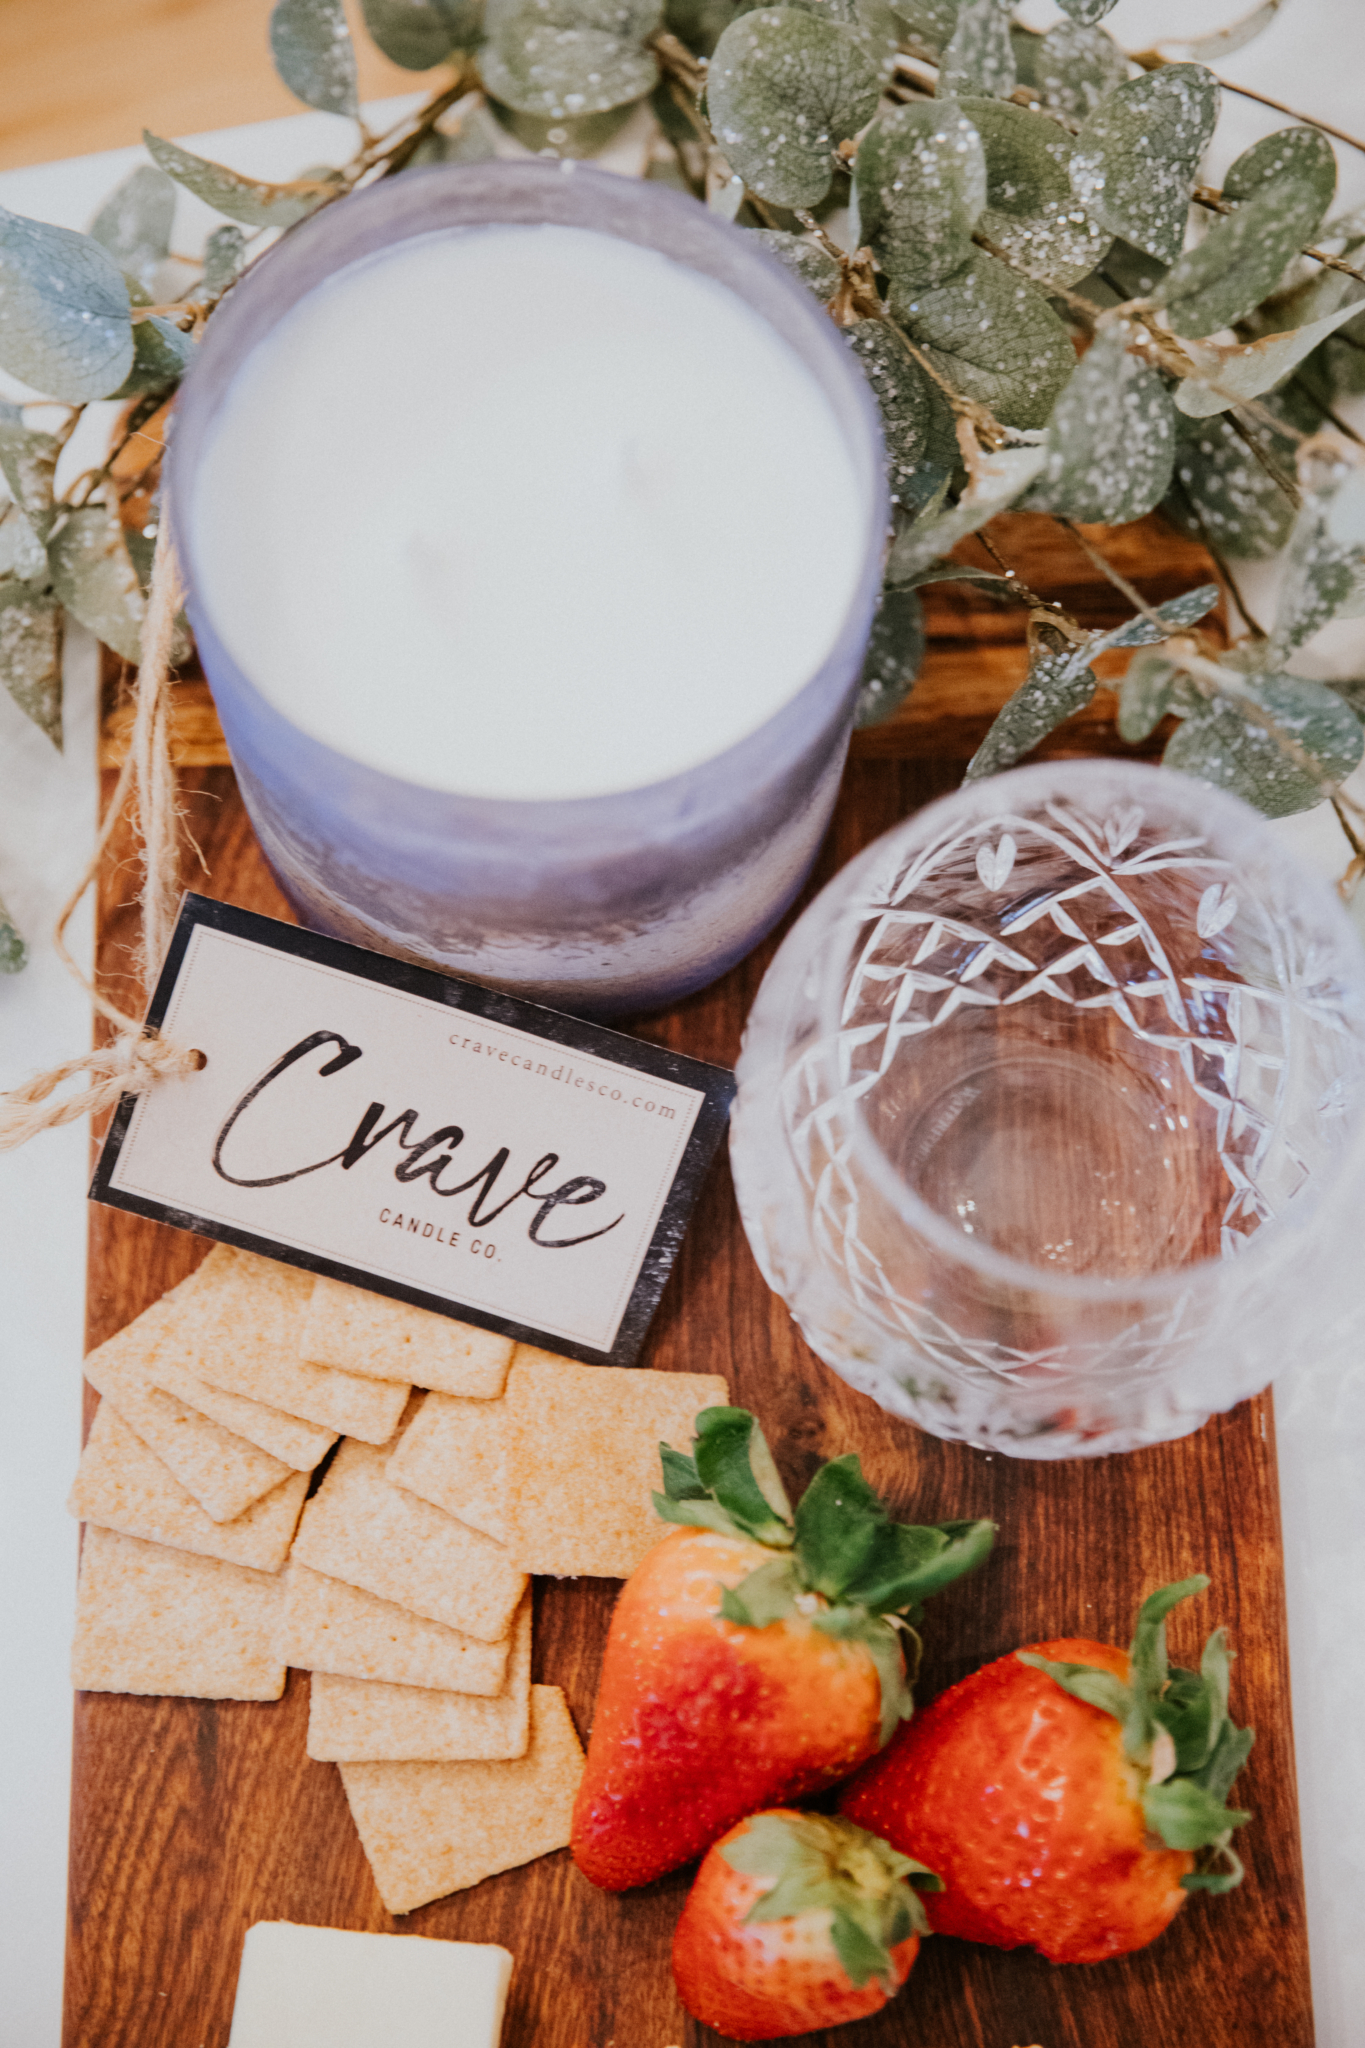 Crave Candles March 25 Crave Candles' story—from a 280 kitchen sink to successful stores like Saks